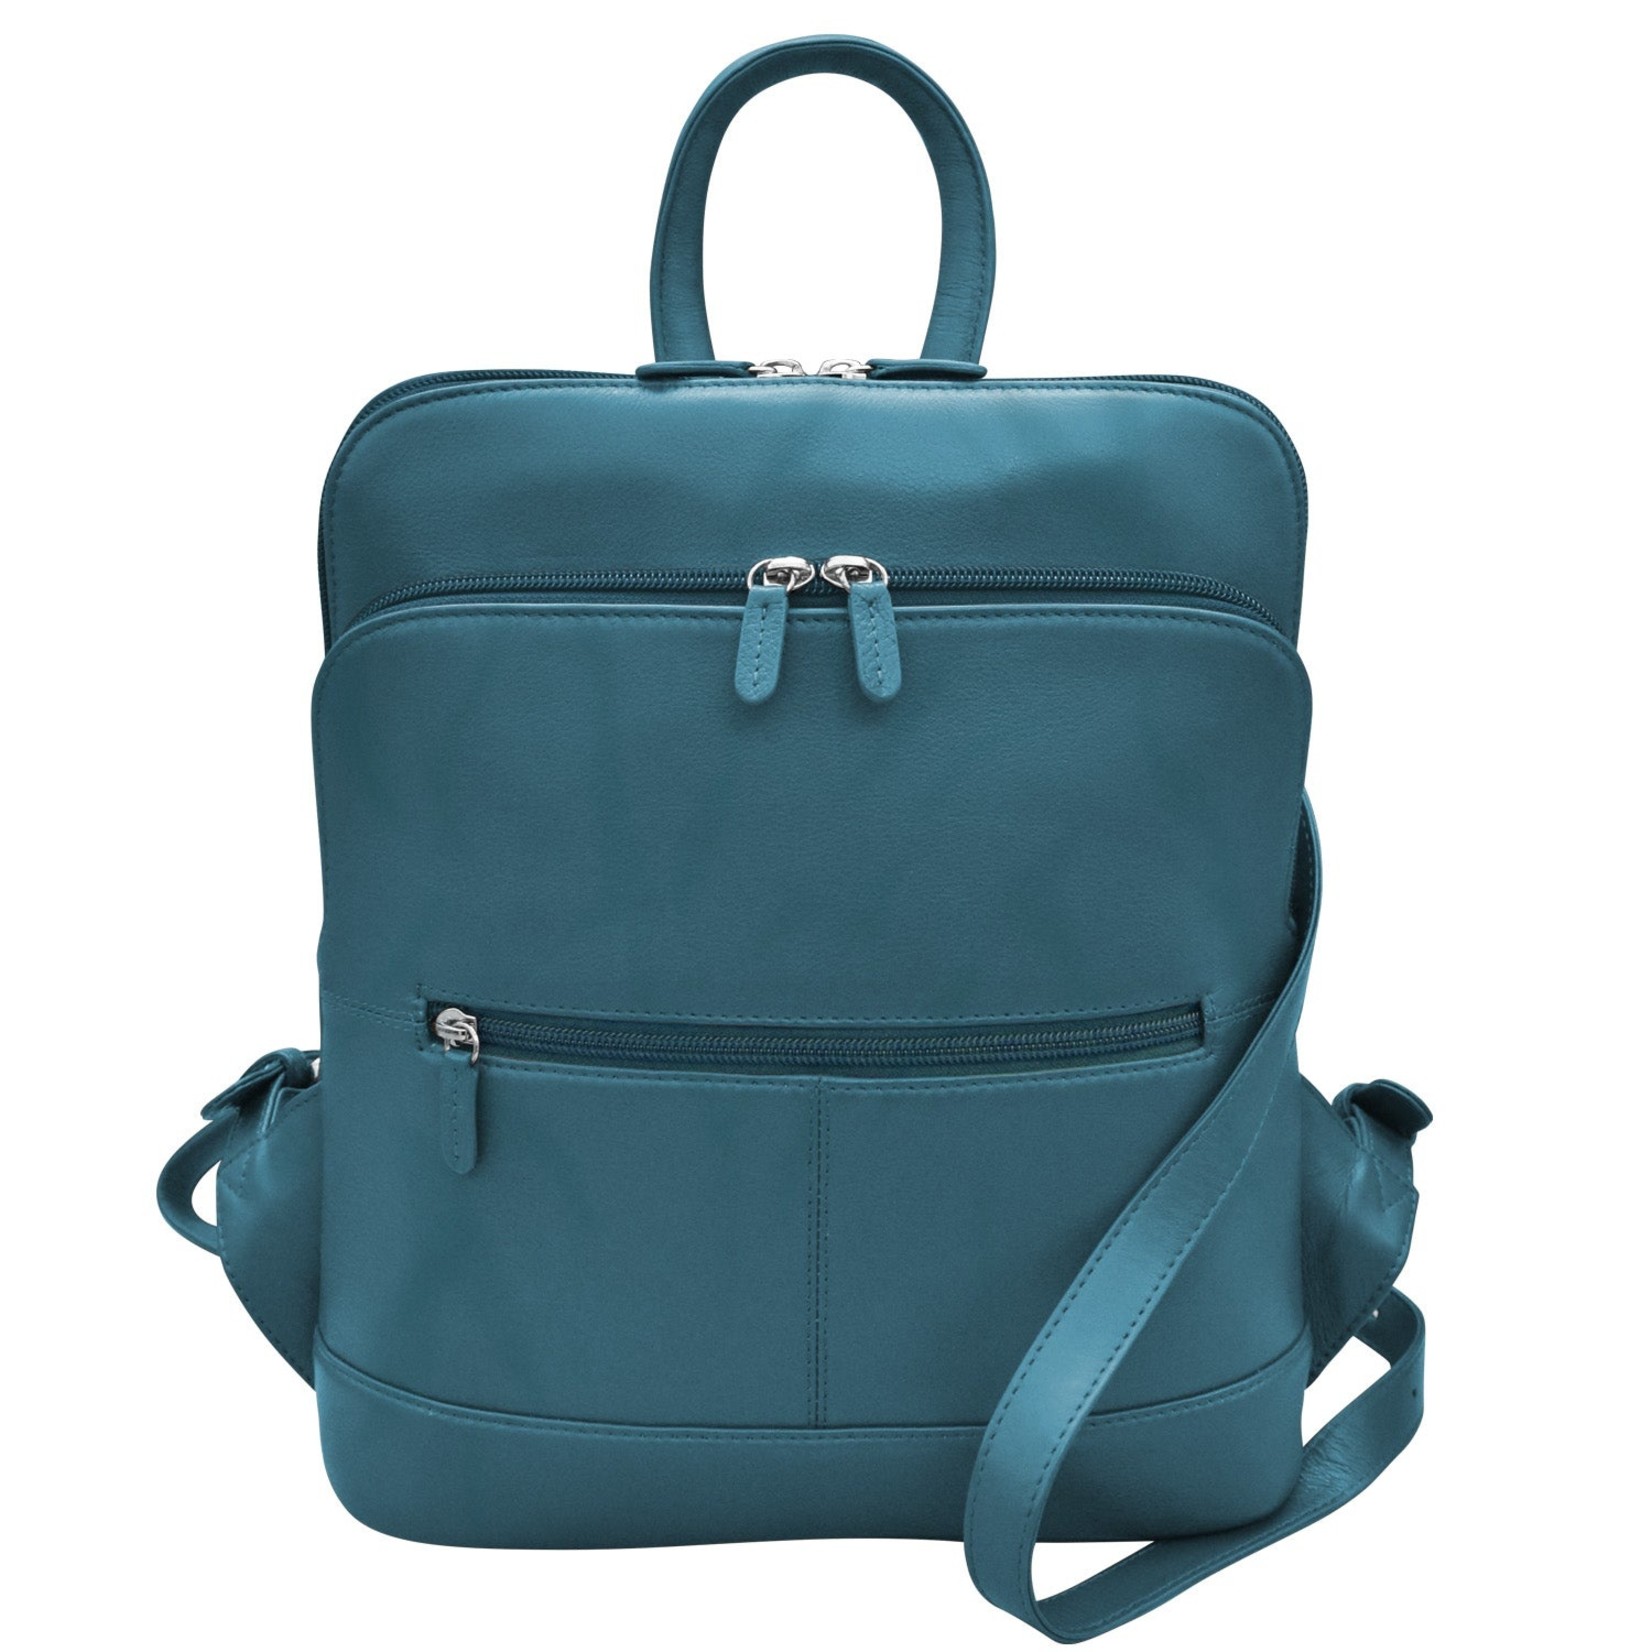 Leather Handbags and Accessories 6505 Jeans Blue - Leather Backpack